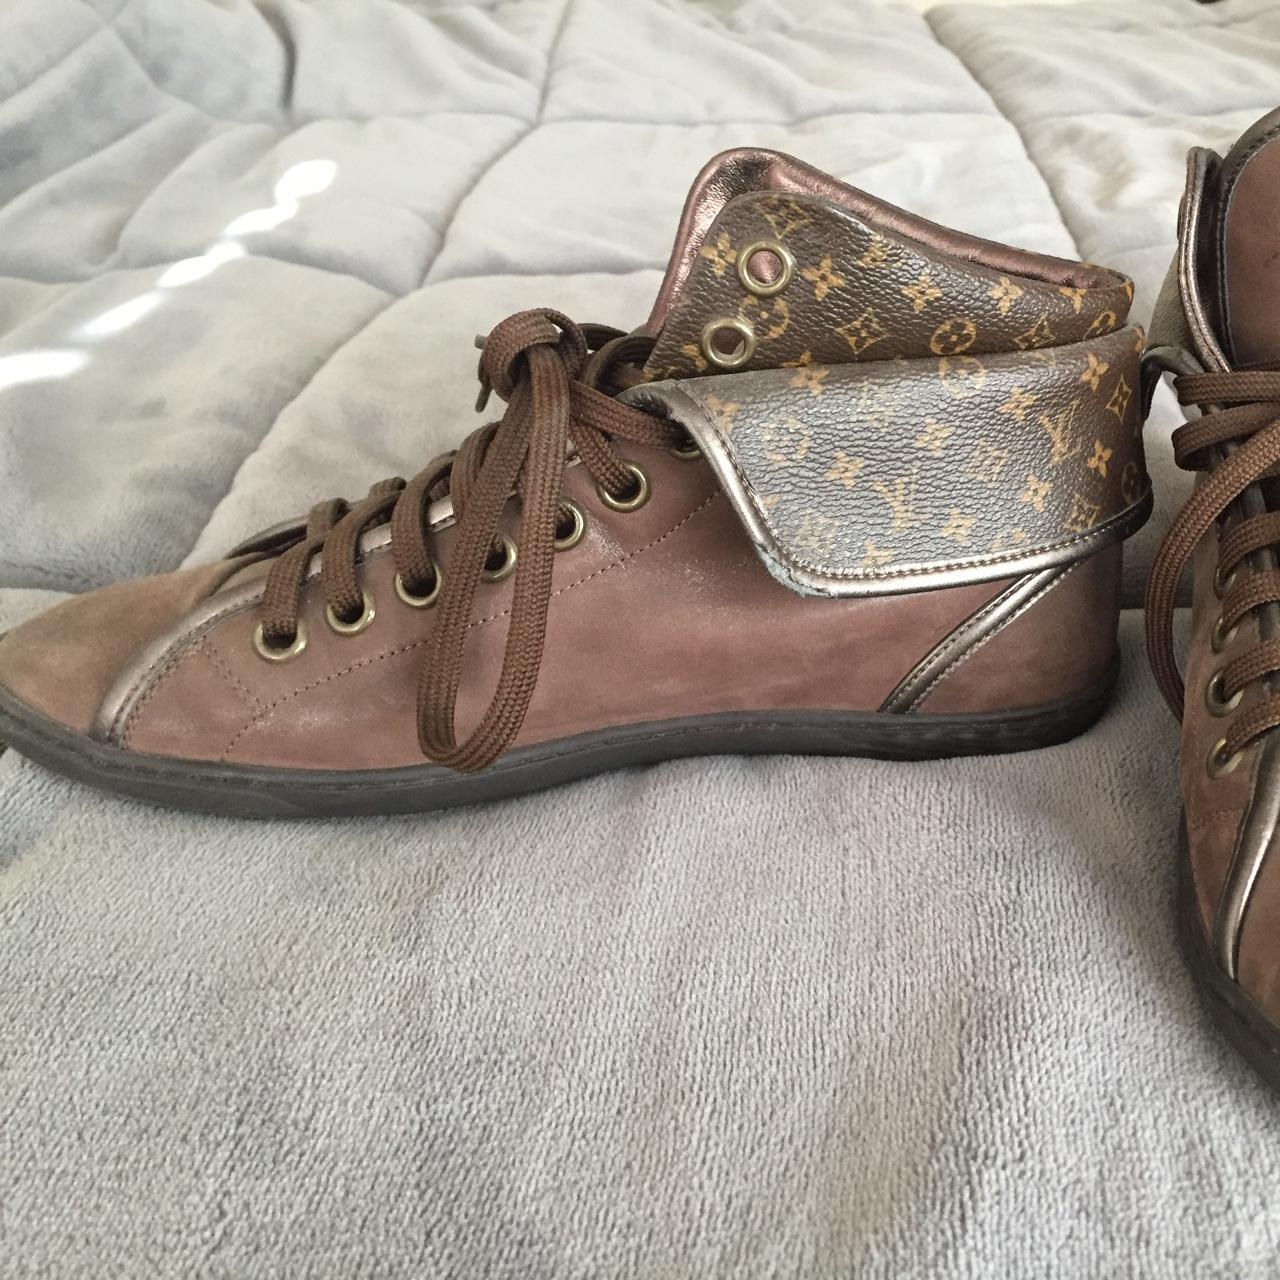 LOUIS VITTON shoes on sale. Size 7.5 worn only twice - Depop